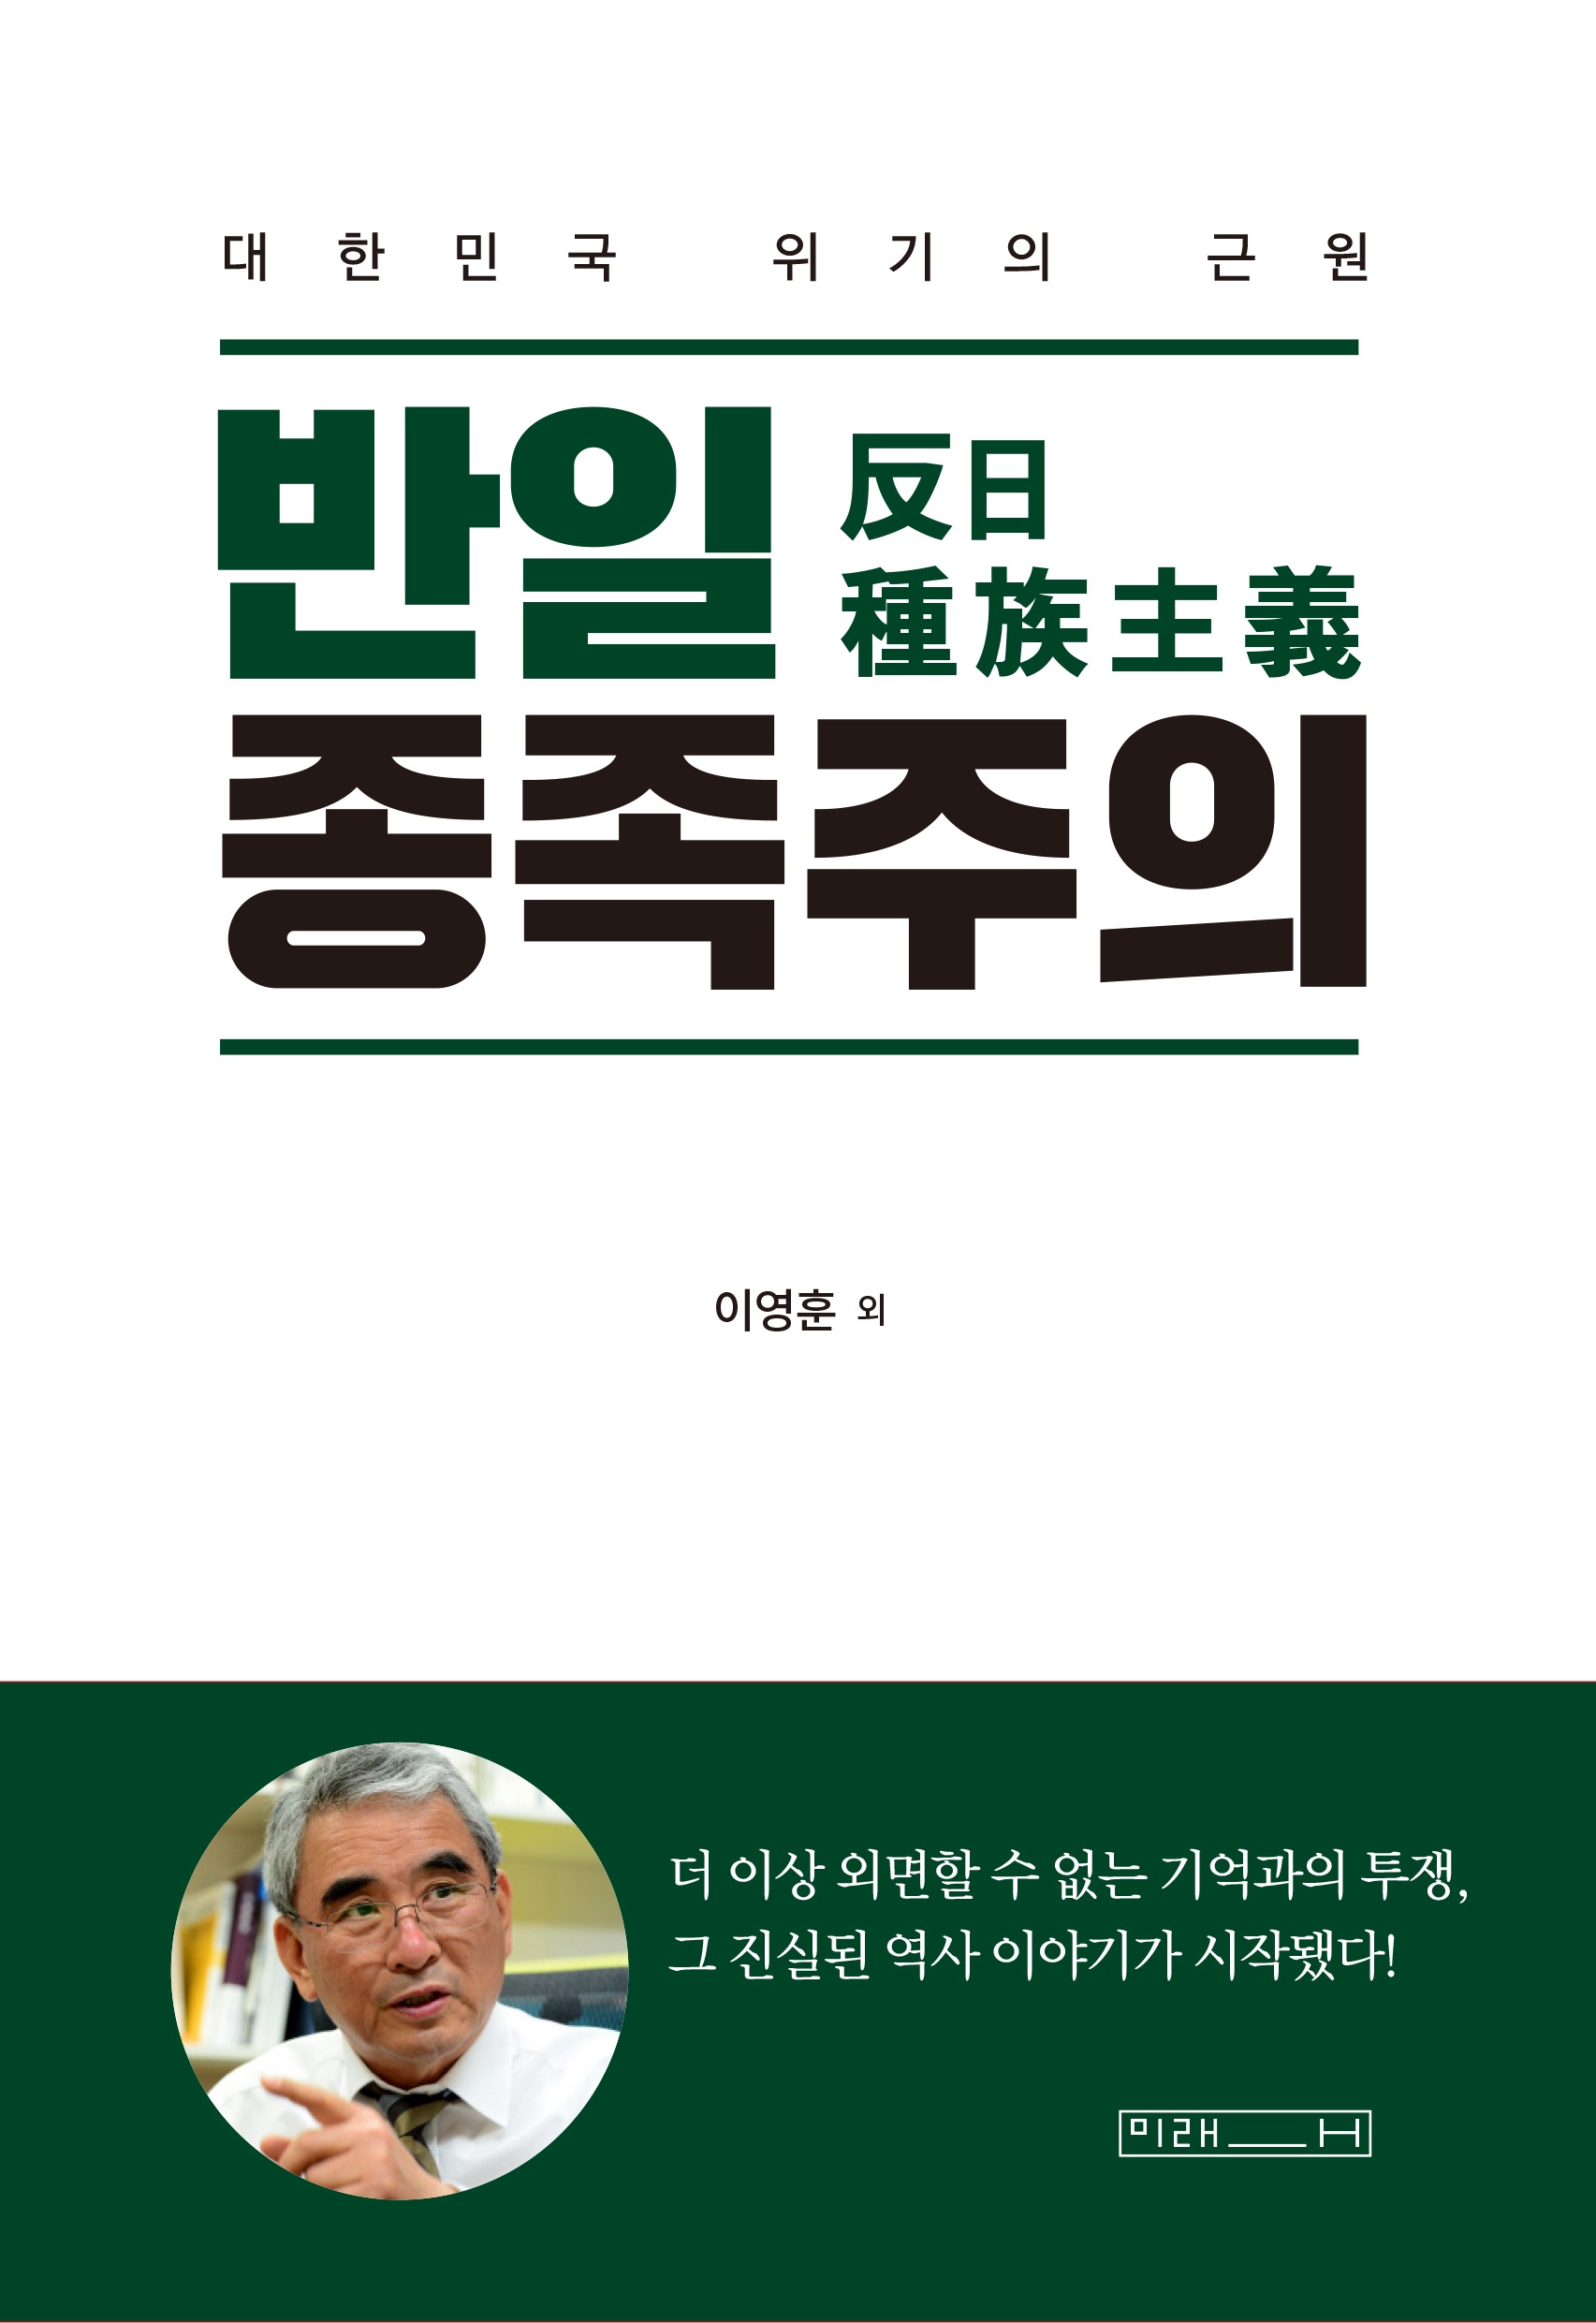 https://bookthumb-phinf.pstatic.net/cover/150/482/15048246.jpg?type=m1&udate=20190817 사진